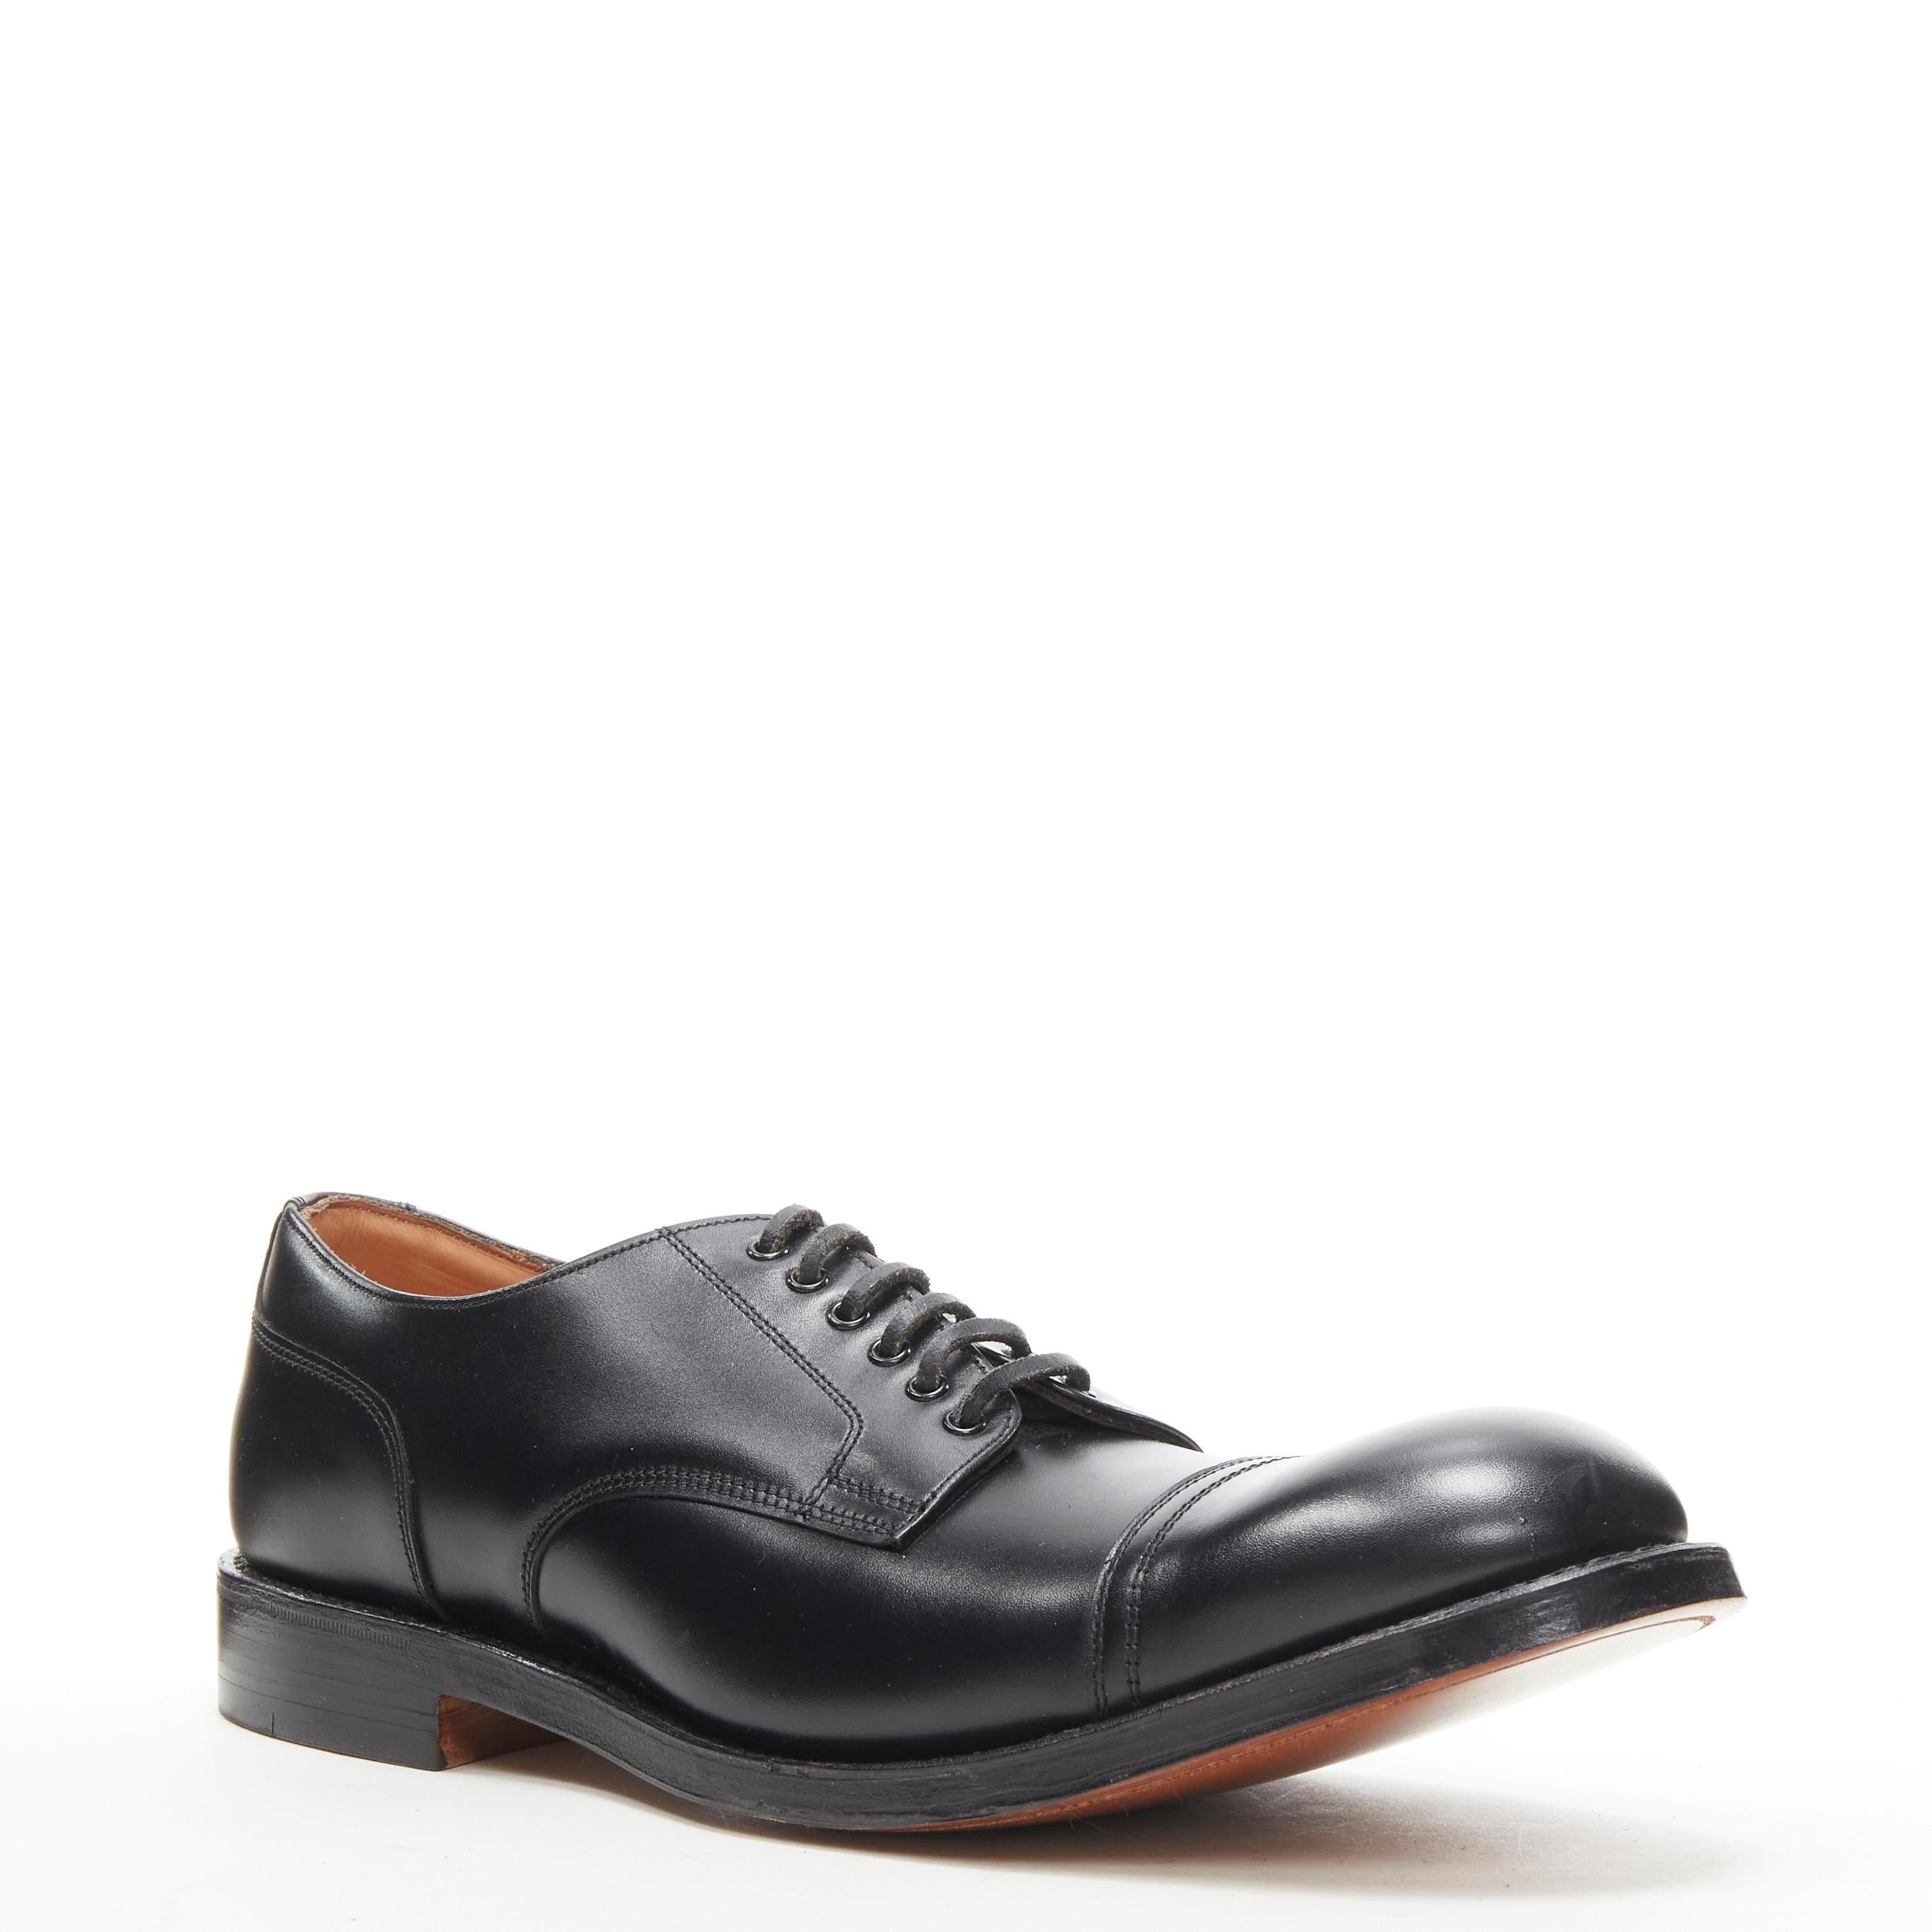 new PAUL HARNDEN SHOEMAKERS black calf leather Welted Derby shoe UK7 EU41 
Reference: TGAS/C00630 
Brand: Paul Harnden 
Model: Welted Derby Shoe 
Material: Leather 
Color: Black 
Pattern: Solid 
Closure: Lace 
Extra Detail: Welted Derby shoe Black